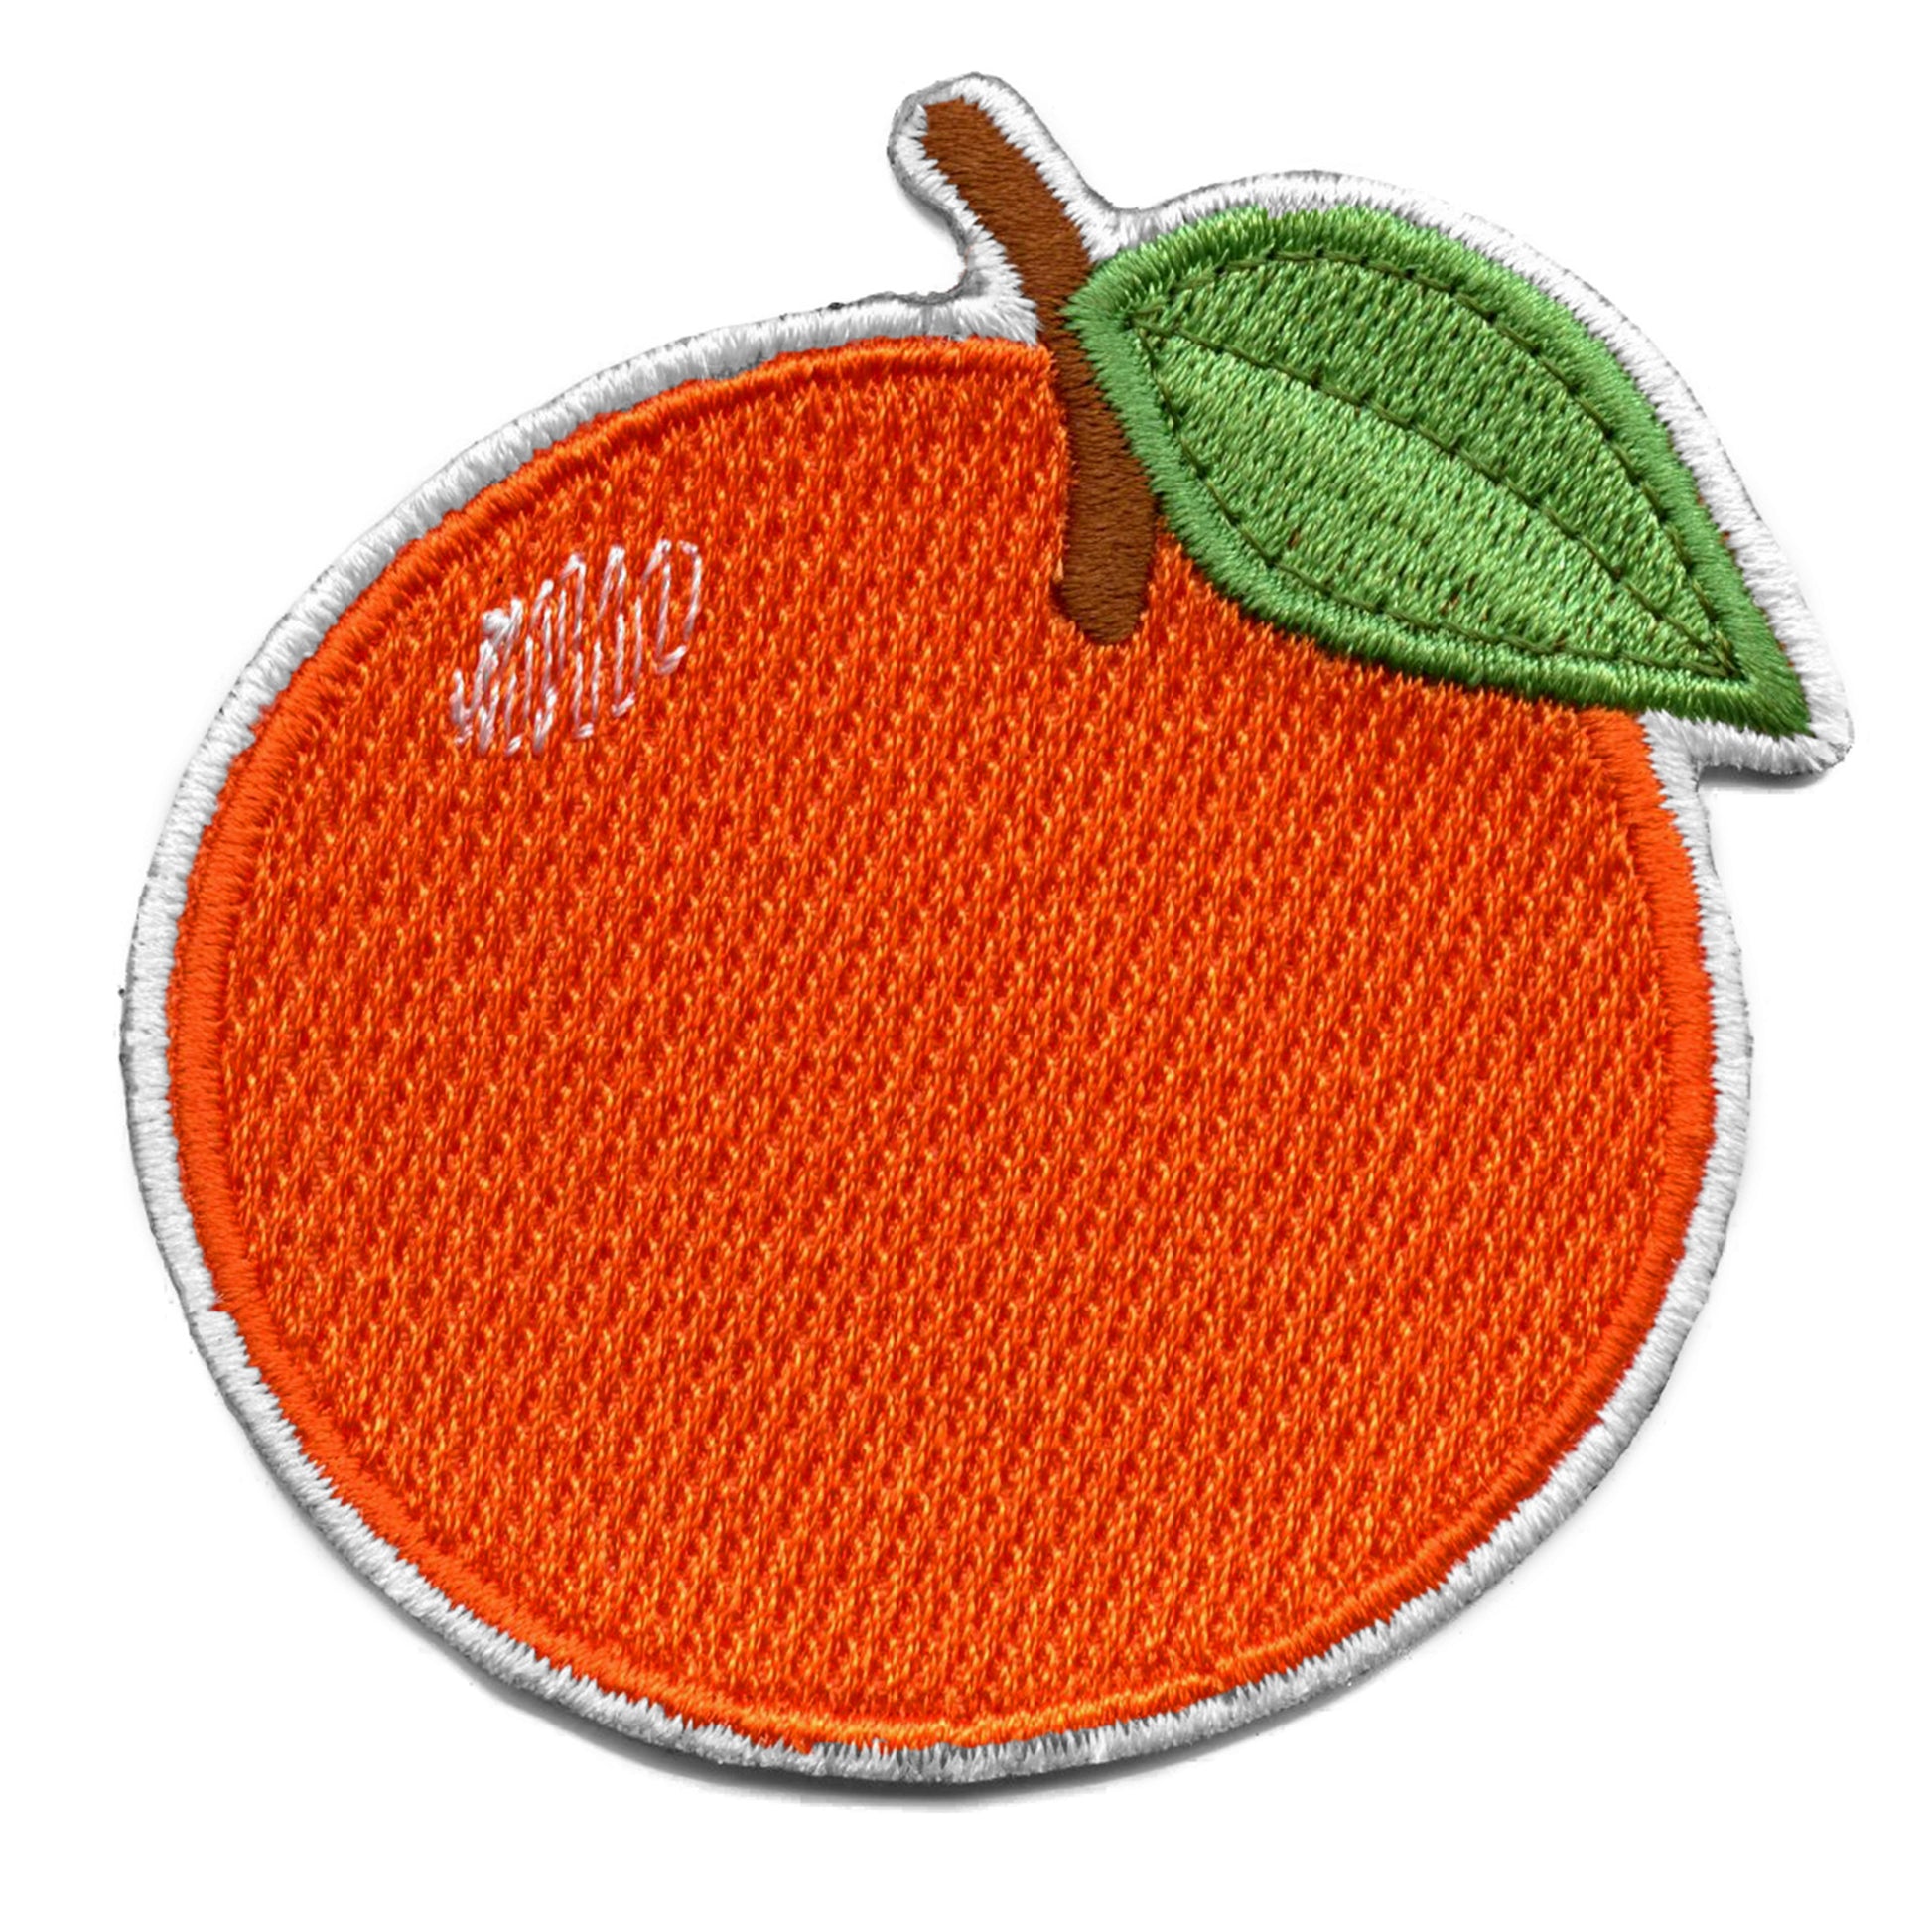 Shop Cute Fruit Embroidery Patches